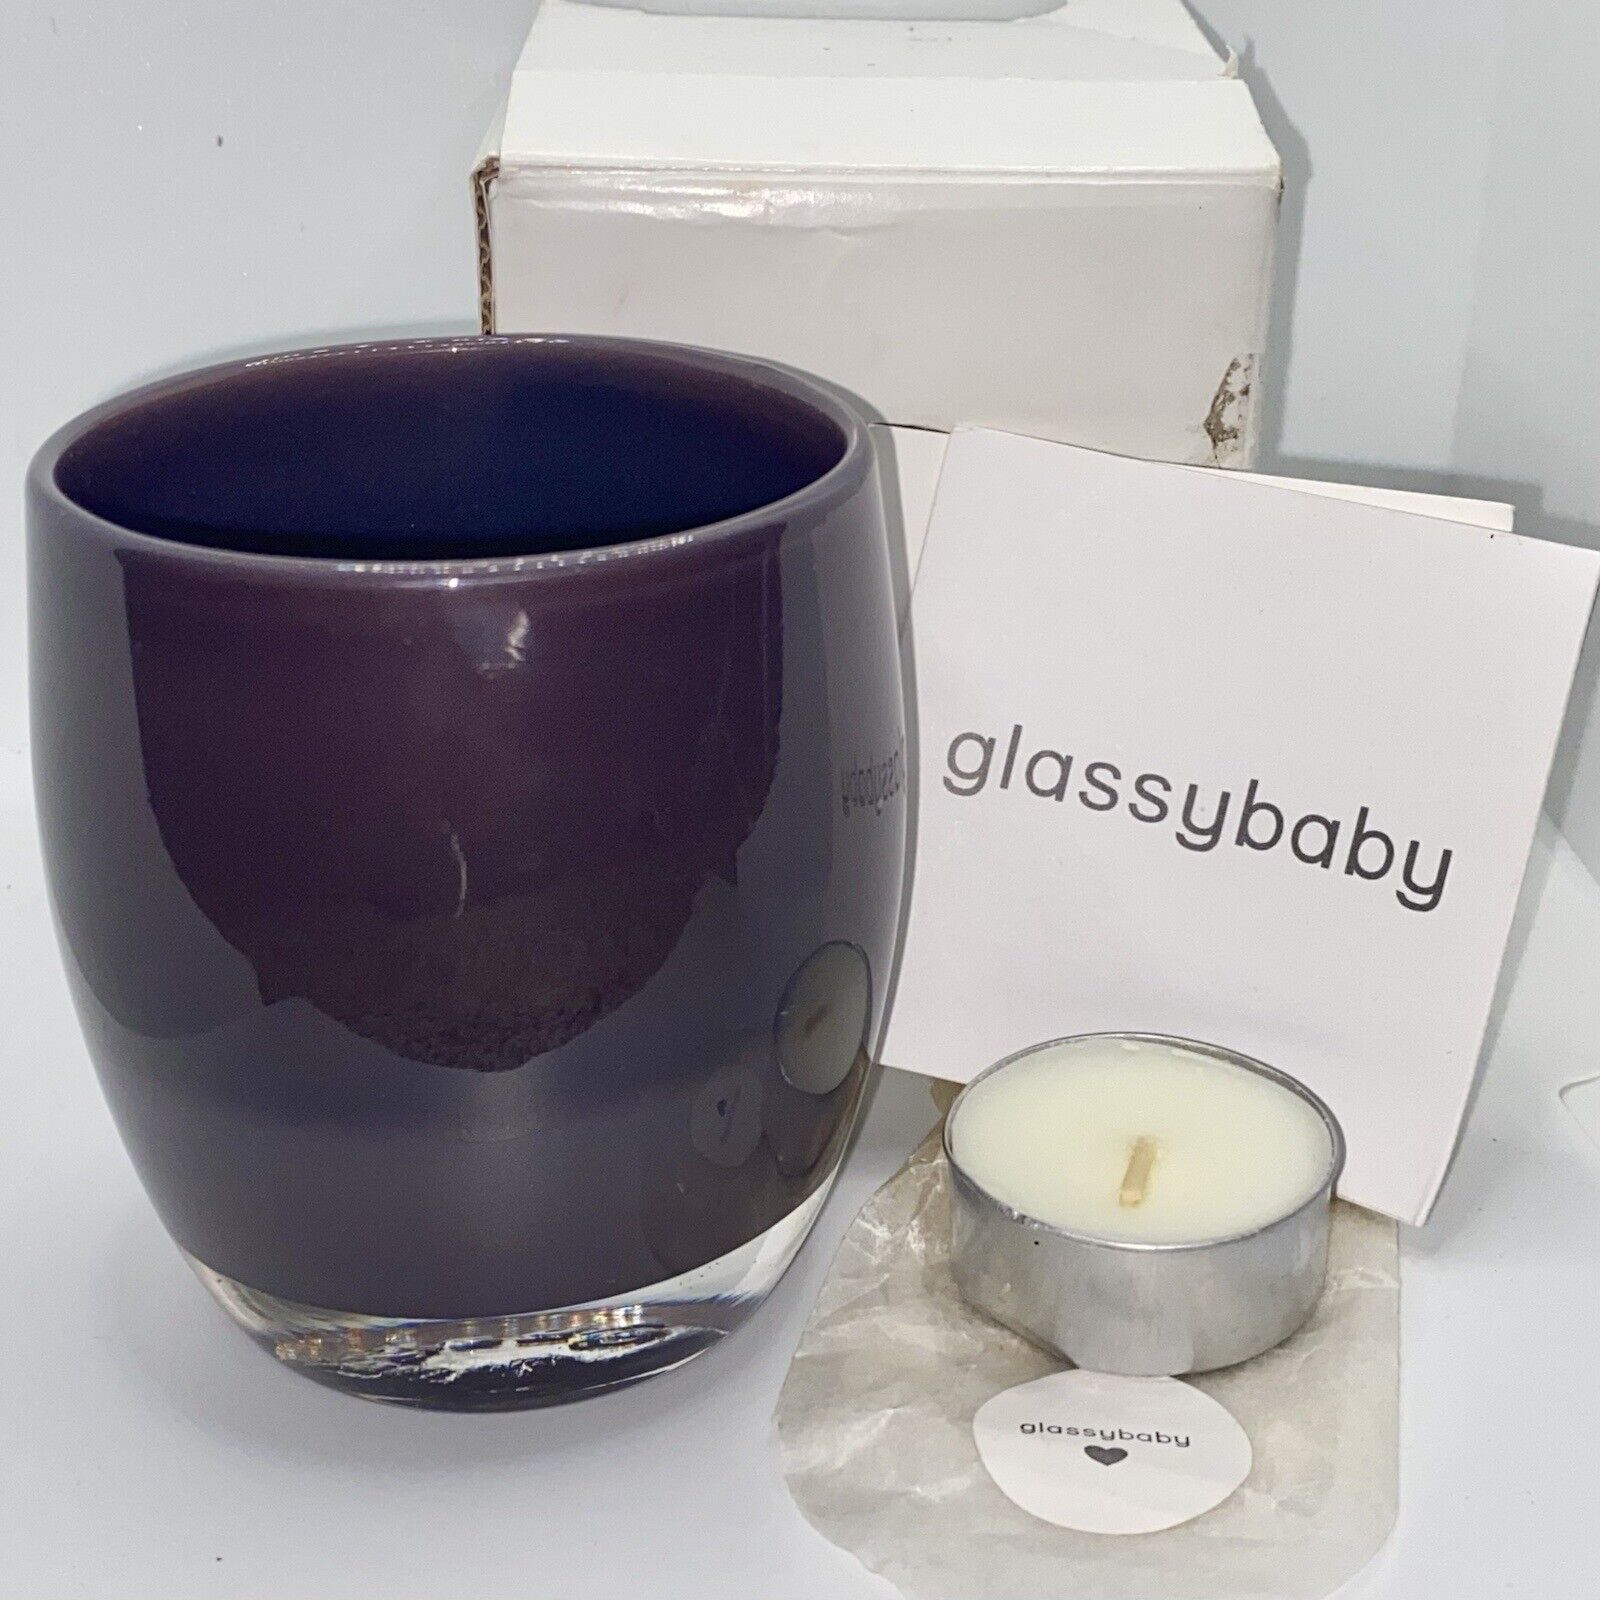 Glassybaby Eggplant Pre-Trisk Candle Votive with Box Tealight Deep Purple *FLAWS